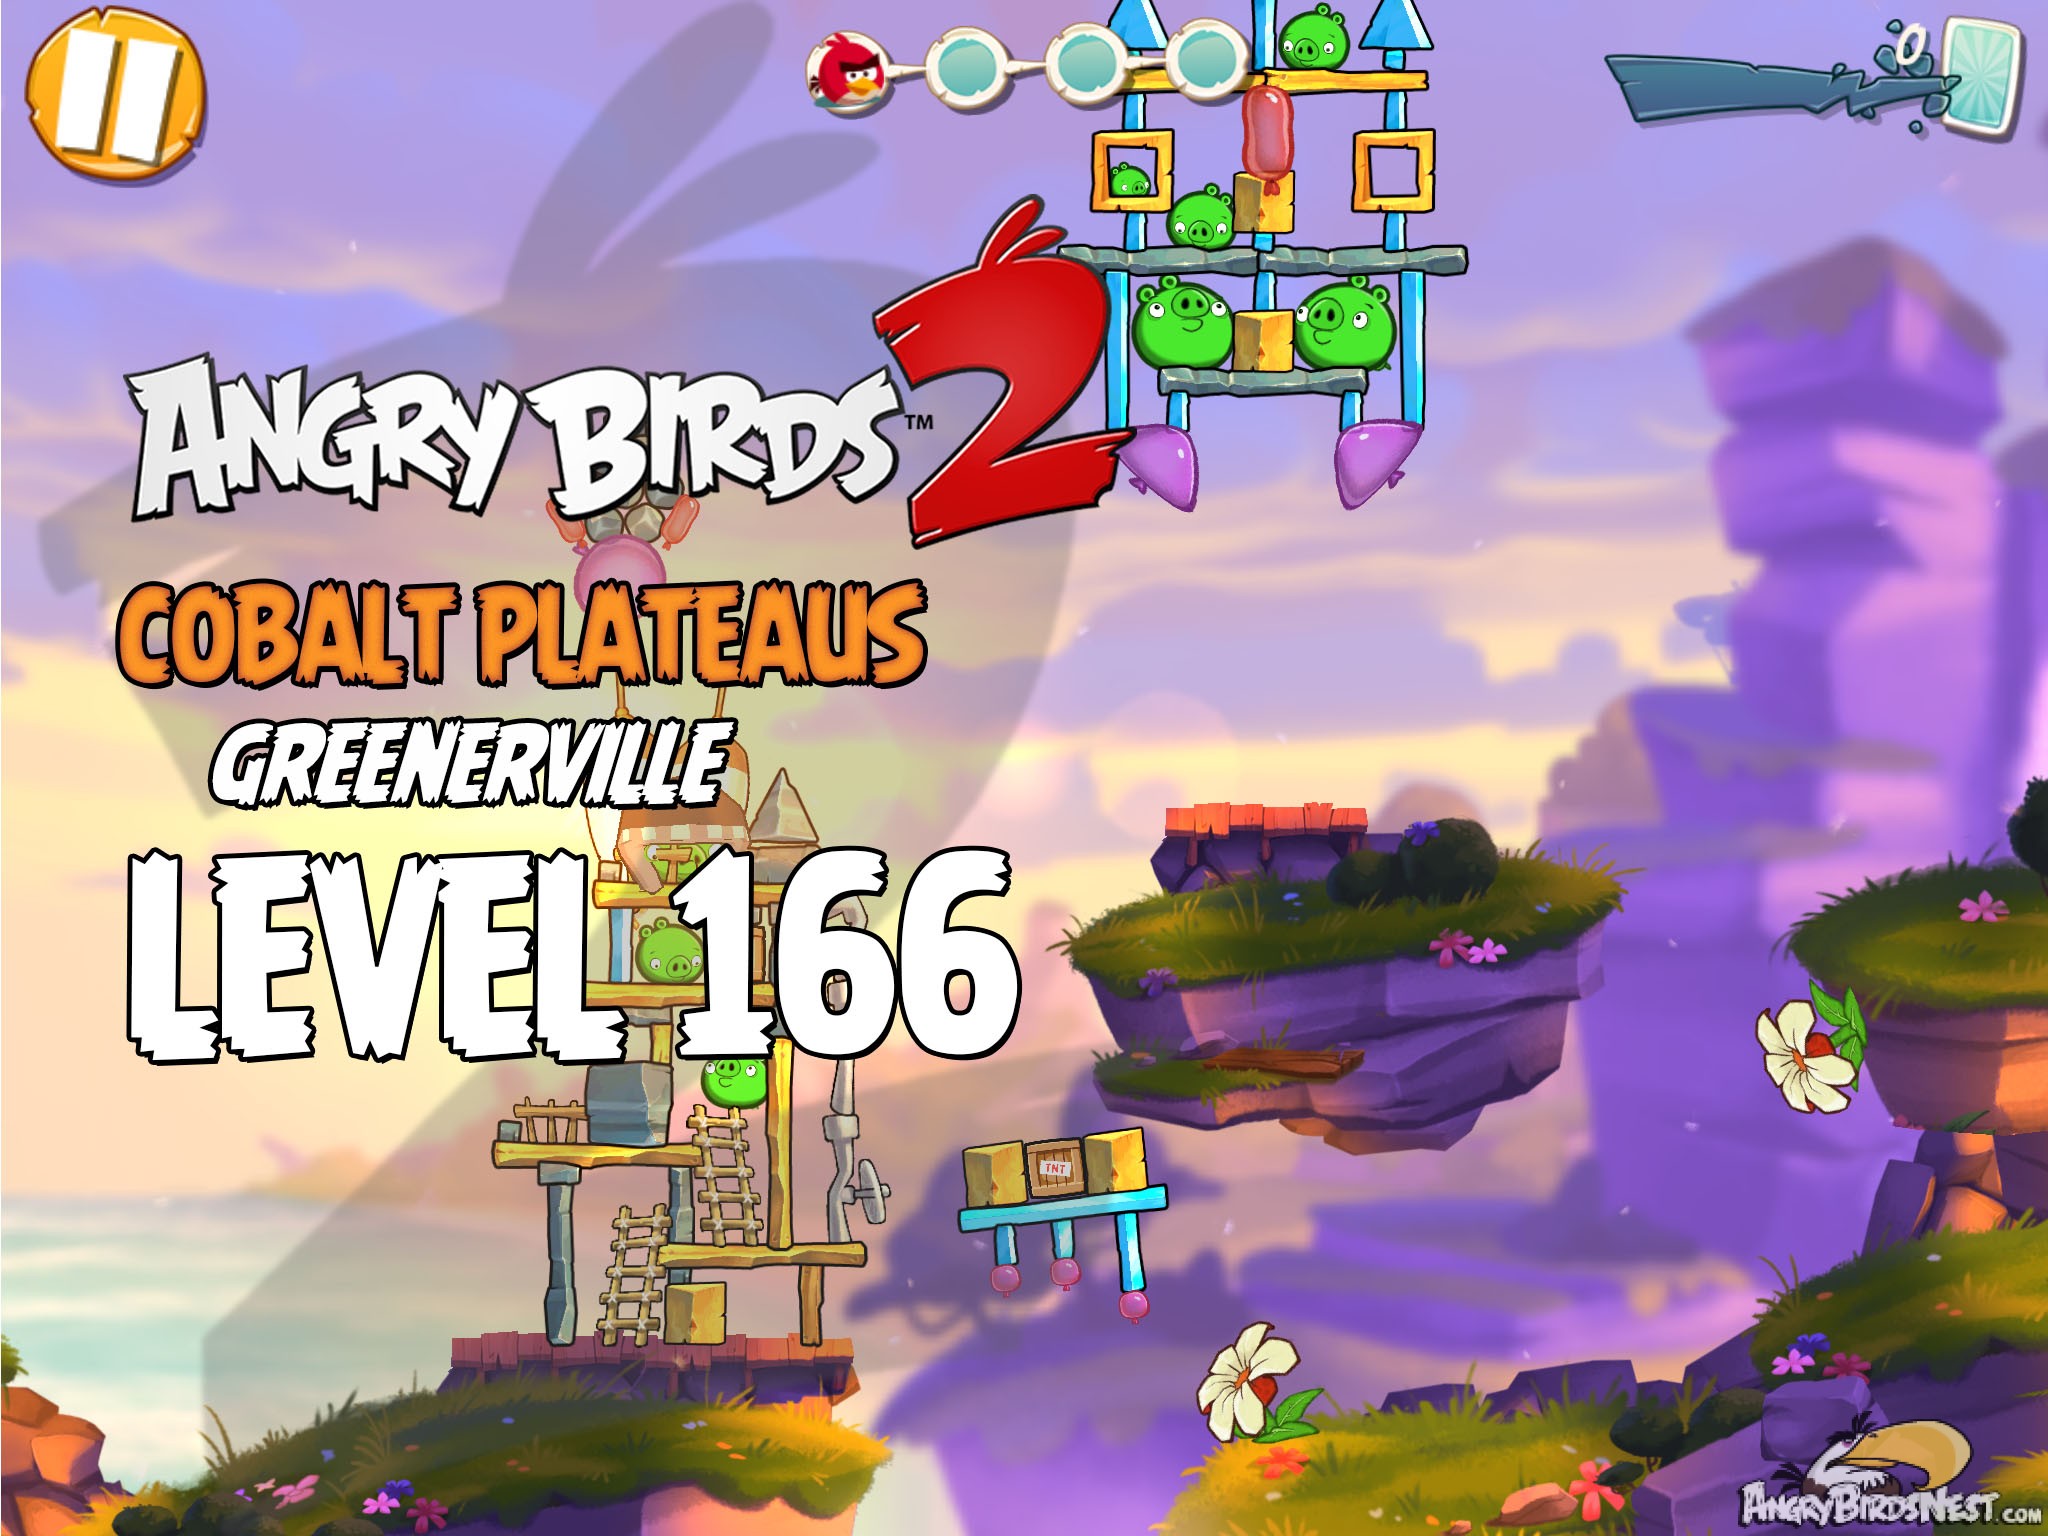 Angry Birds 2 Cobalt Plateaus Greenerville Level 166